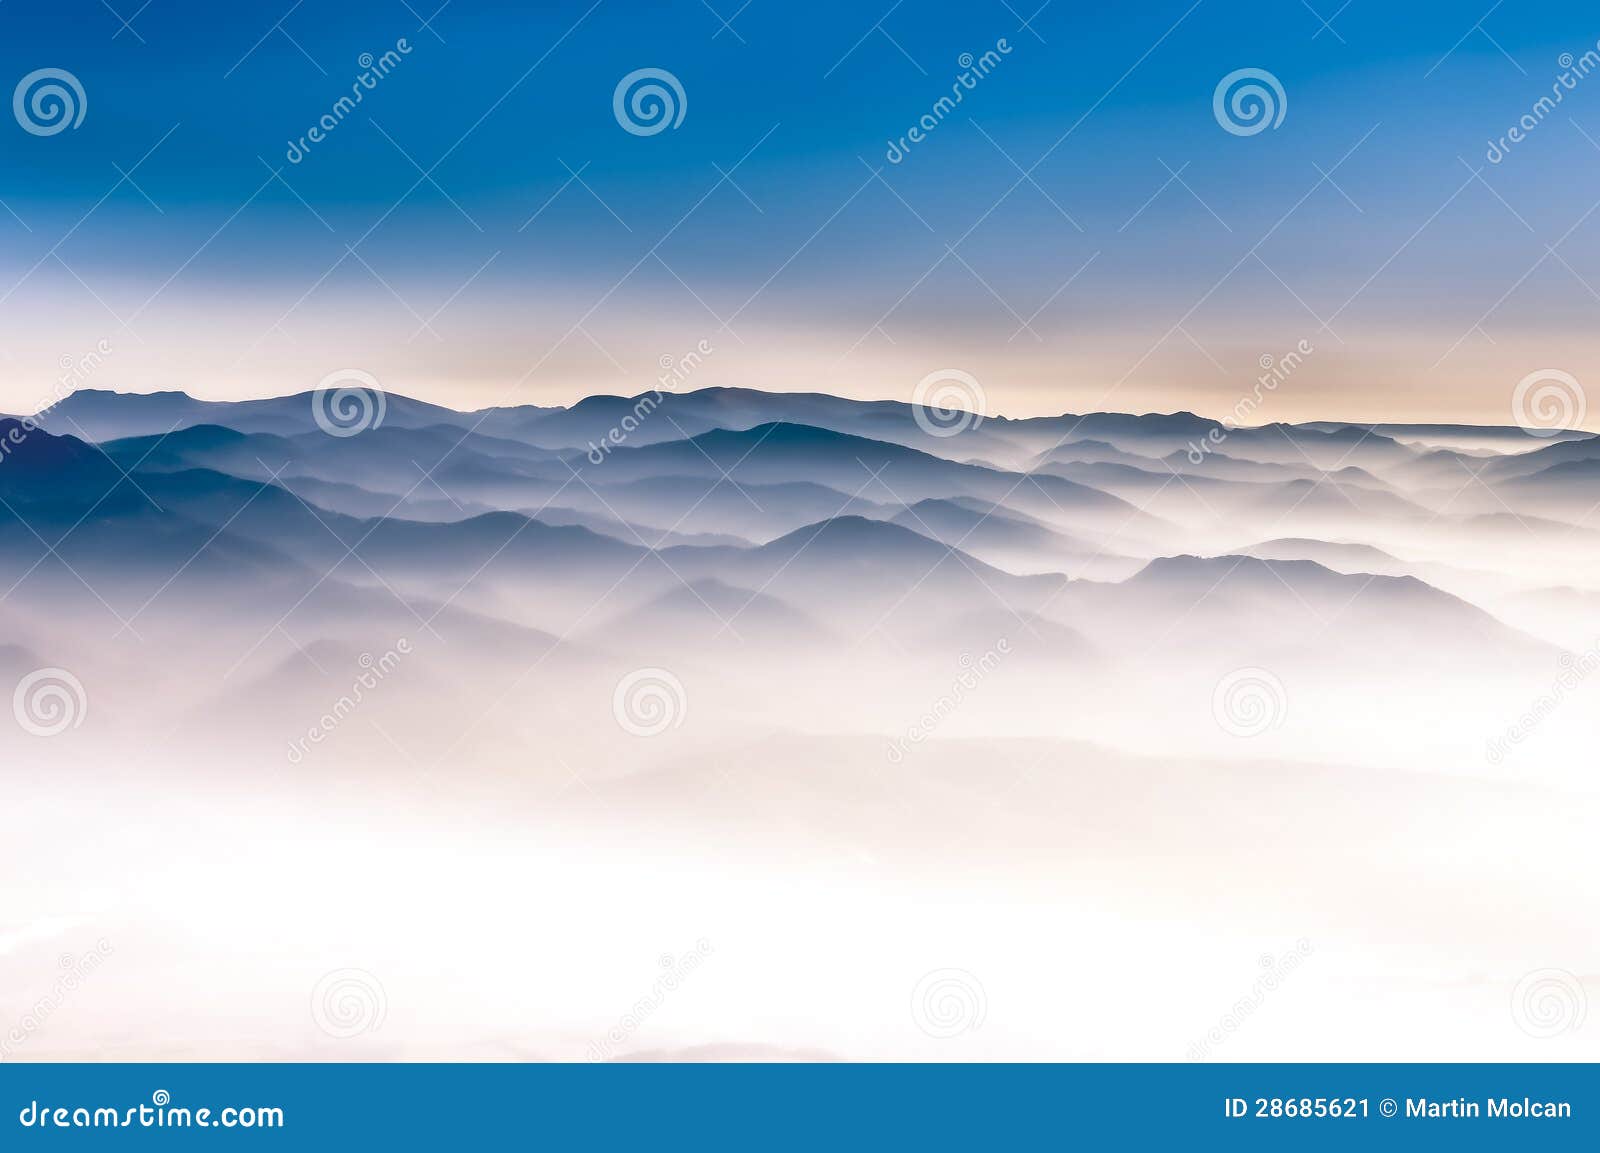 misty mountains landscape view with blue sky